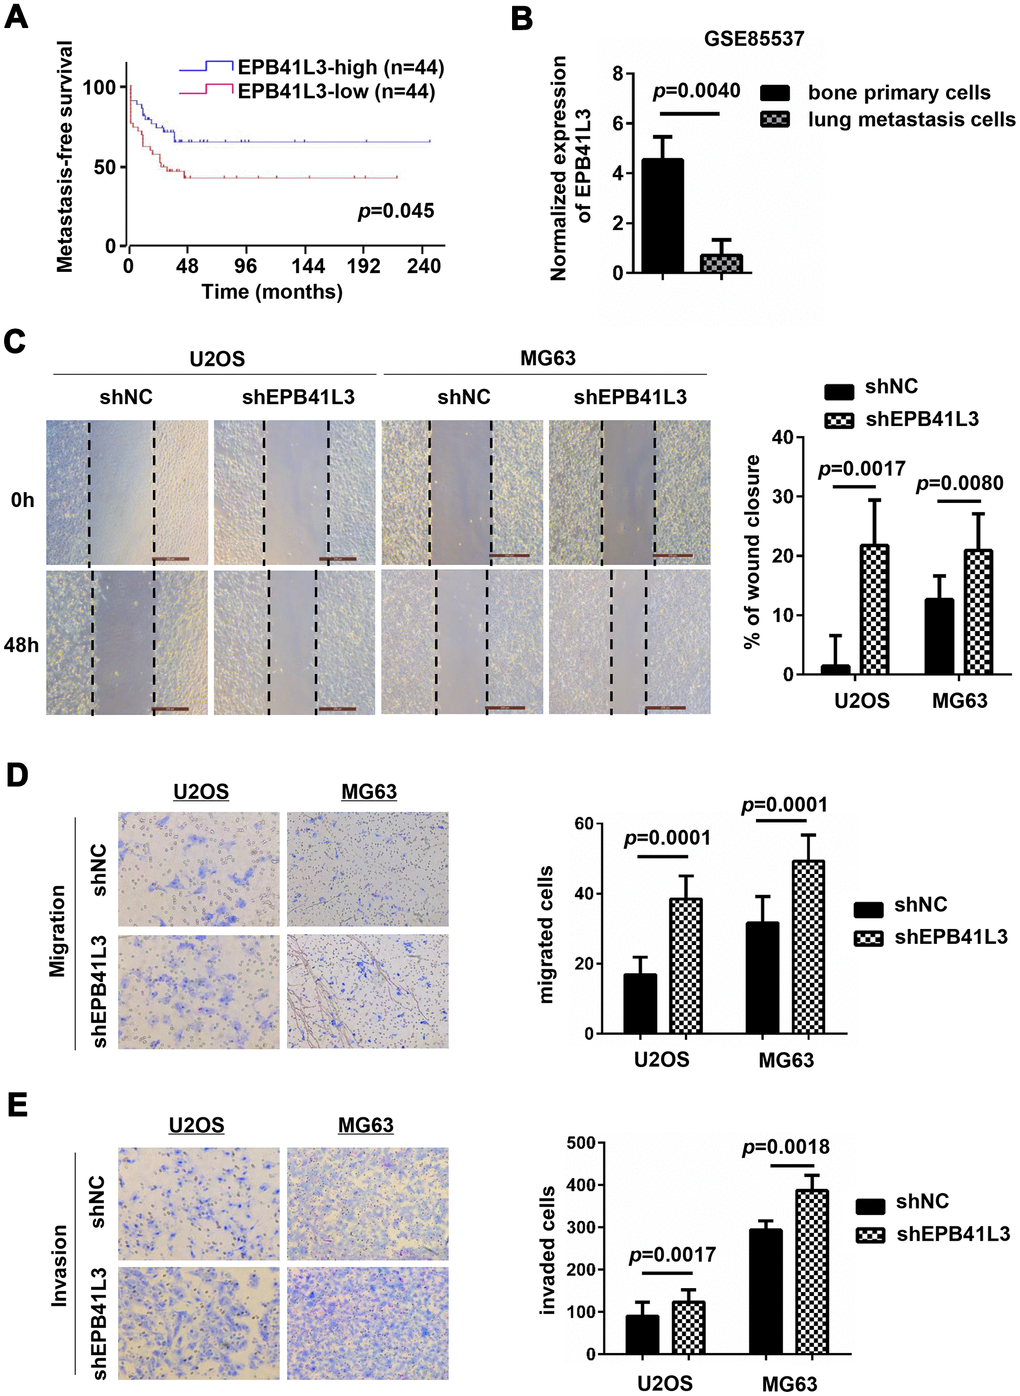 EPB41L3 knockdown promotes migration and invasion of osteosarcoma cells. (A) Metastasis-free survival analysis of patients from GSE42352 (p=0.0450) in the R2 online database (http://r2.amc.nl). (B) EPB41L3 mRNA expression was significantly higher in primary osteosarcoma cells than lung metastasis cells from GSE85537. (C) Wound-healing assays for U2OS and MG63 cells stably expressing shNC or shEPB41L3. (D) U2OS and MG63 cells stably expressing shNC or shEPB41L3 were subjected to Boyden’s chamber migration assays. Representative images of cell migration were presented (magnification, x100) and migratory cells were counted. (E) U2OS and MG63 cells stably expressing shNC or shEPB41L3 were subjected to Matrigel-coated invasion assays. Representative images of cell invasion were presented (magnification, x100) and invasive cells were counted. All experiments were repeated three times. Data were presented as the mean ± SD.